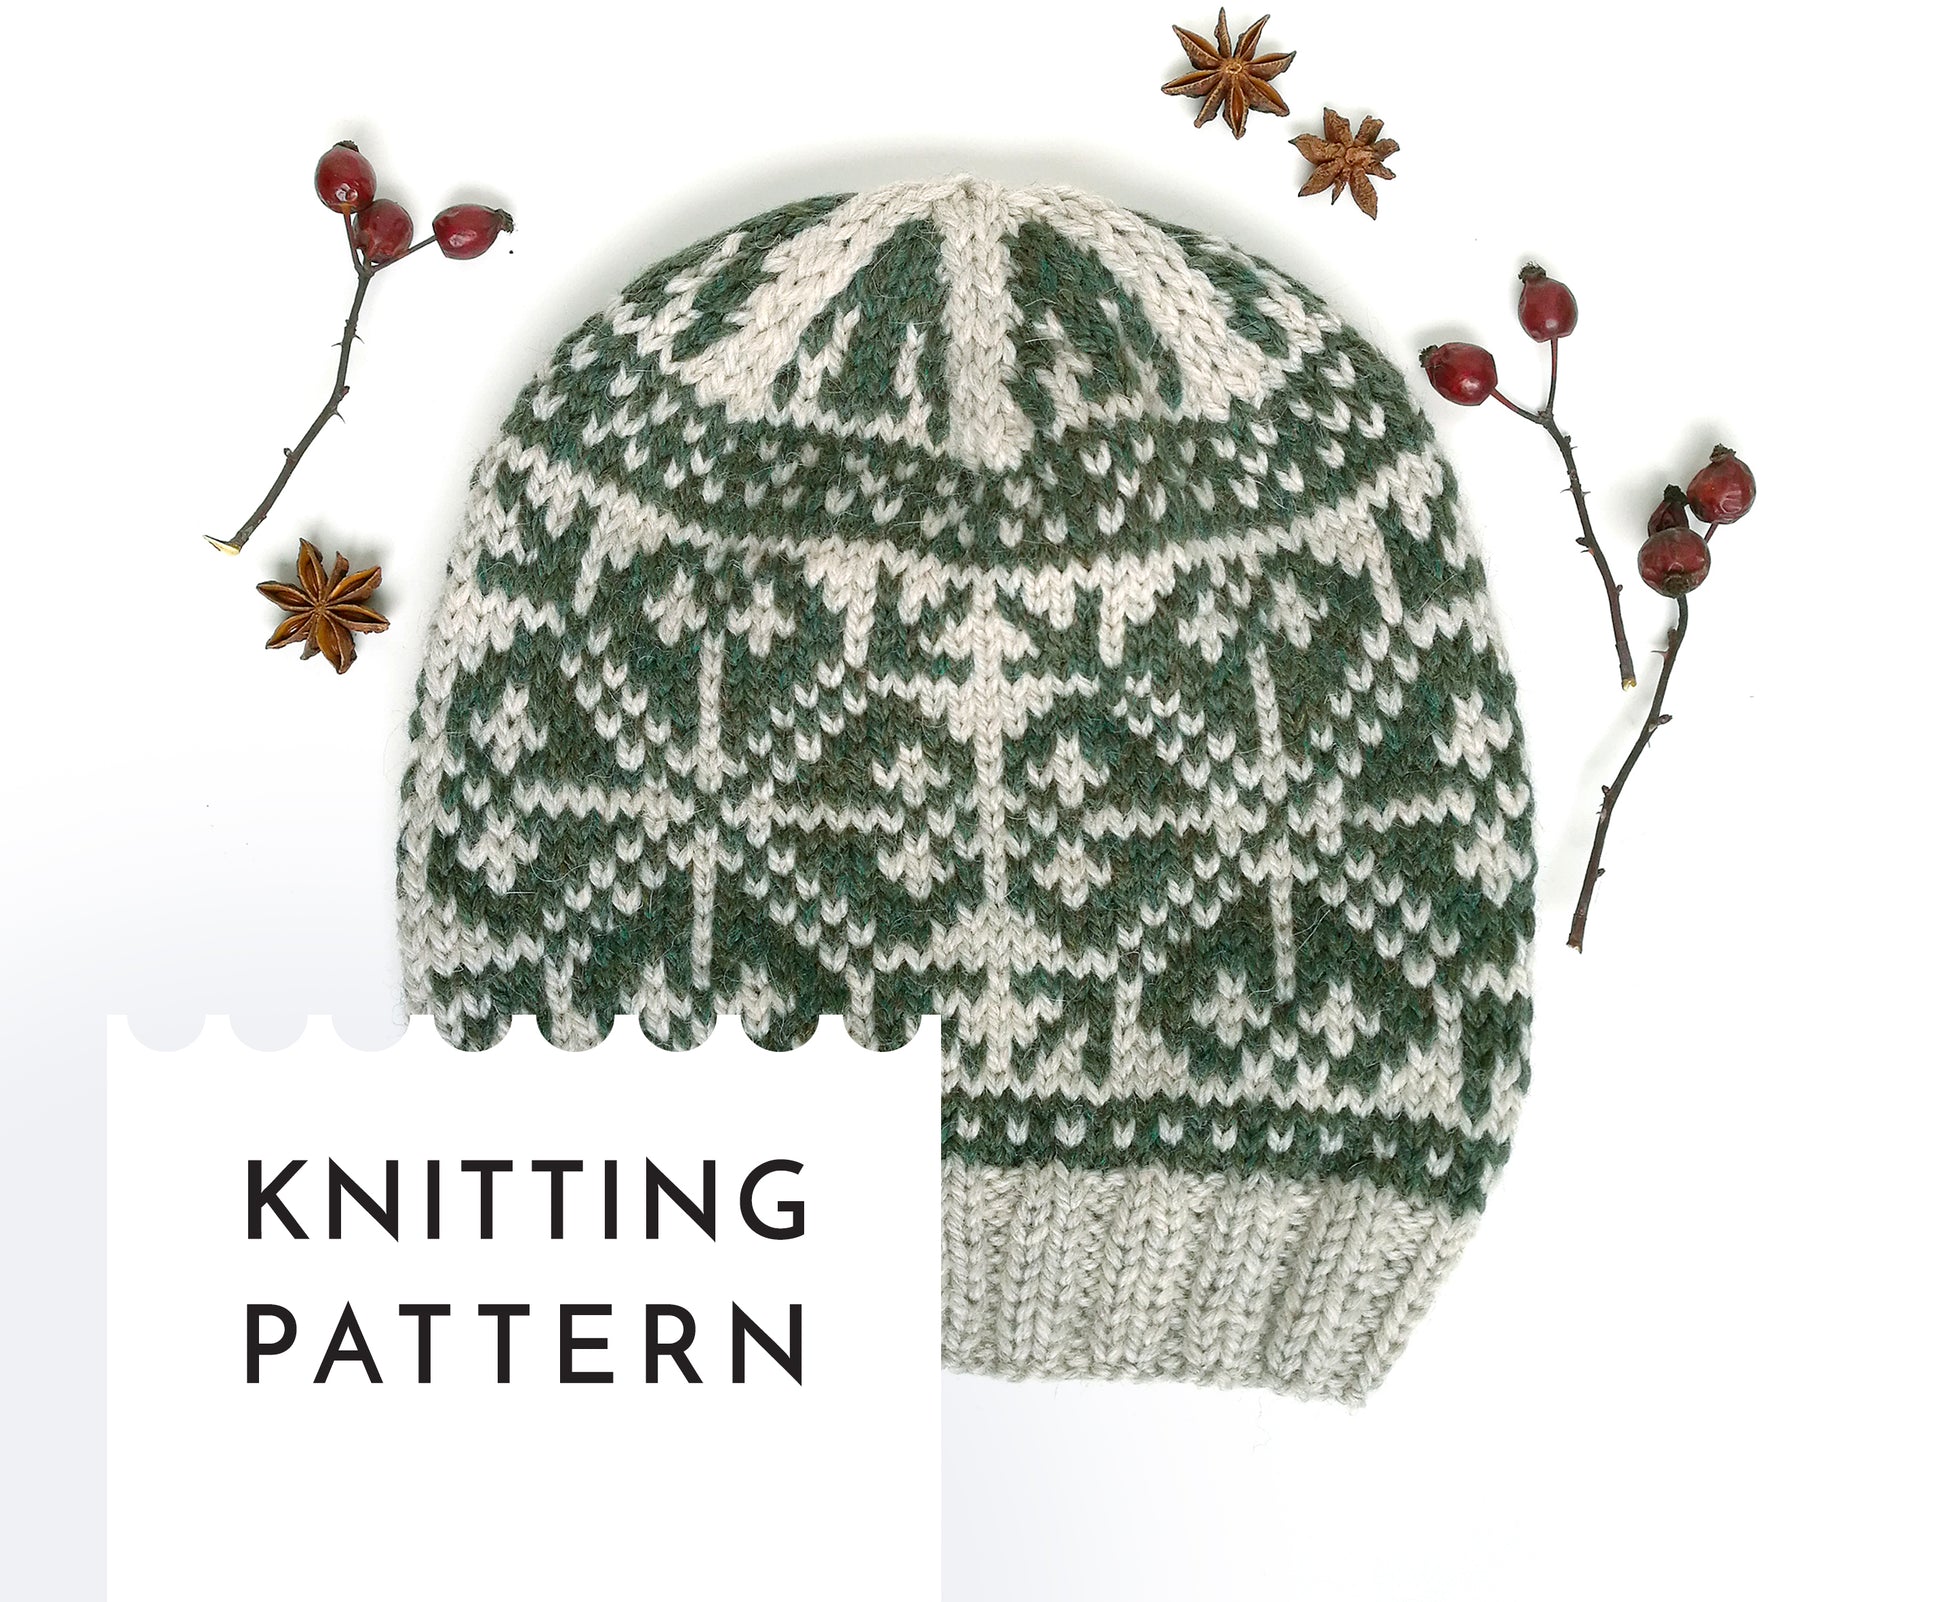 beige and green wool hand-knitted Fair Isle beanie hat in snowflake knitting pattern